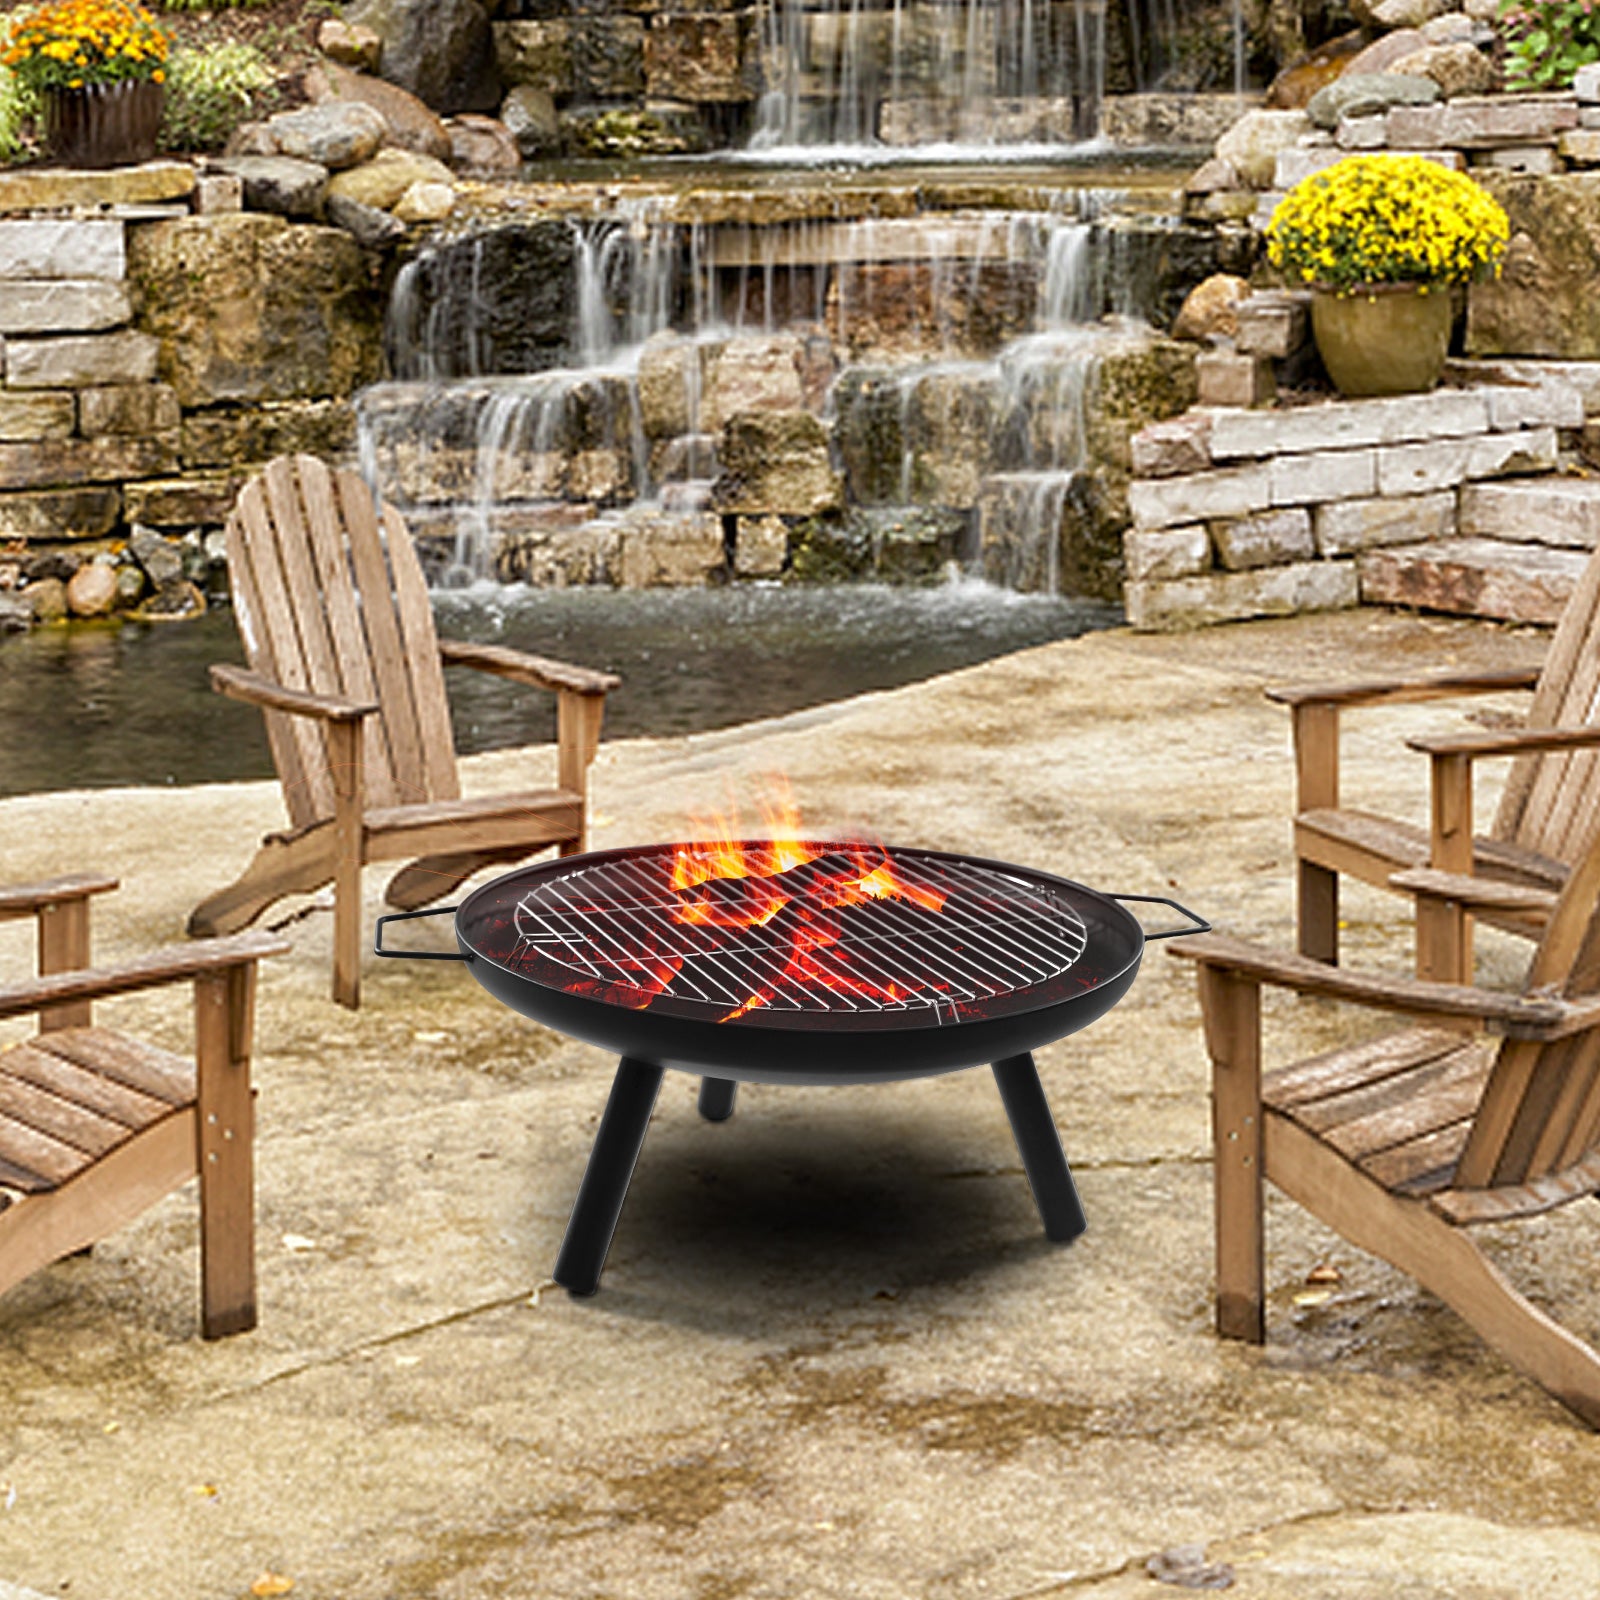 23" Outdoor Patio Round Wood Burning Fire Pit Bowl with Grill and Poker